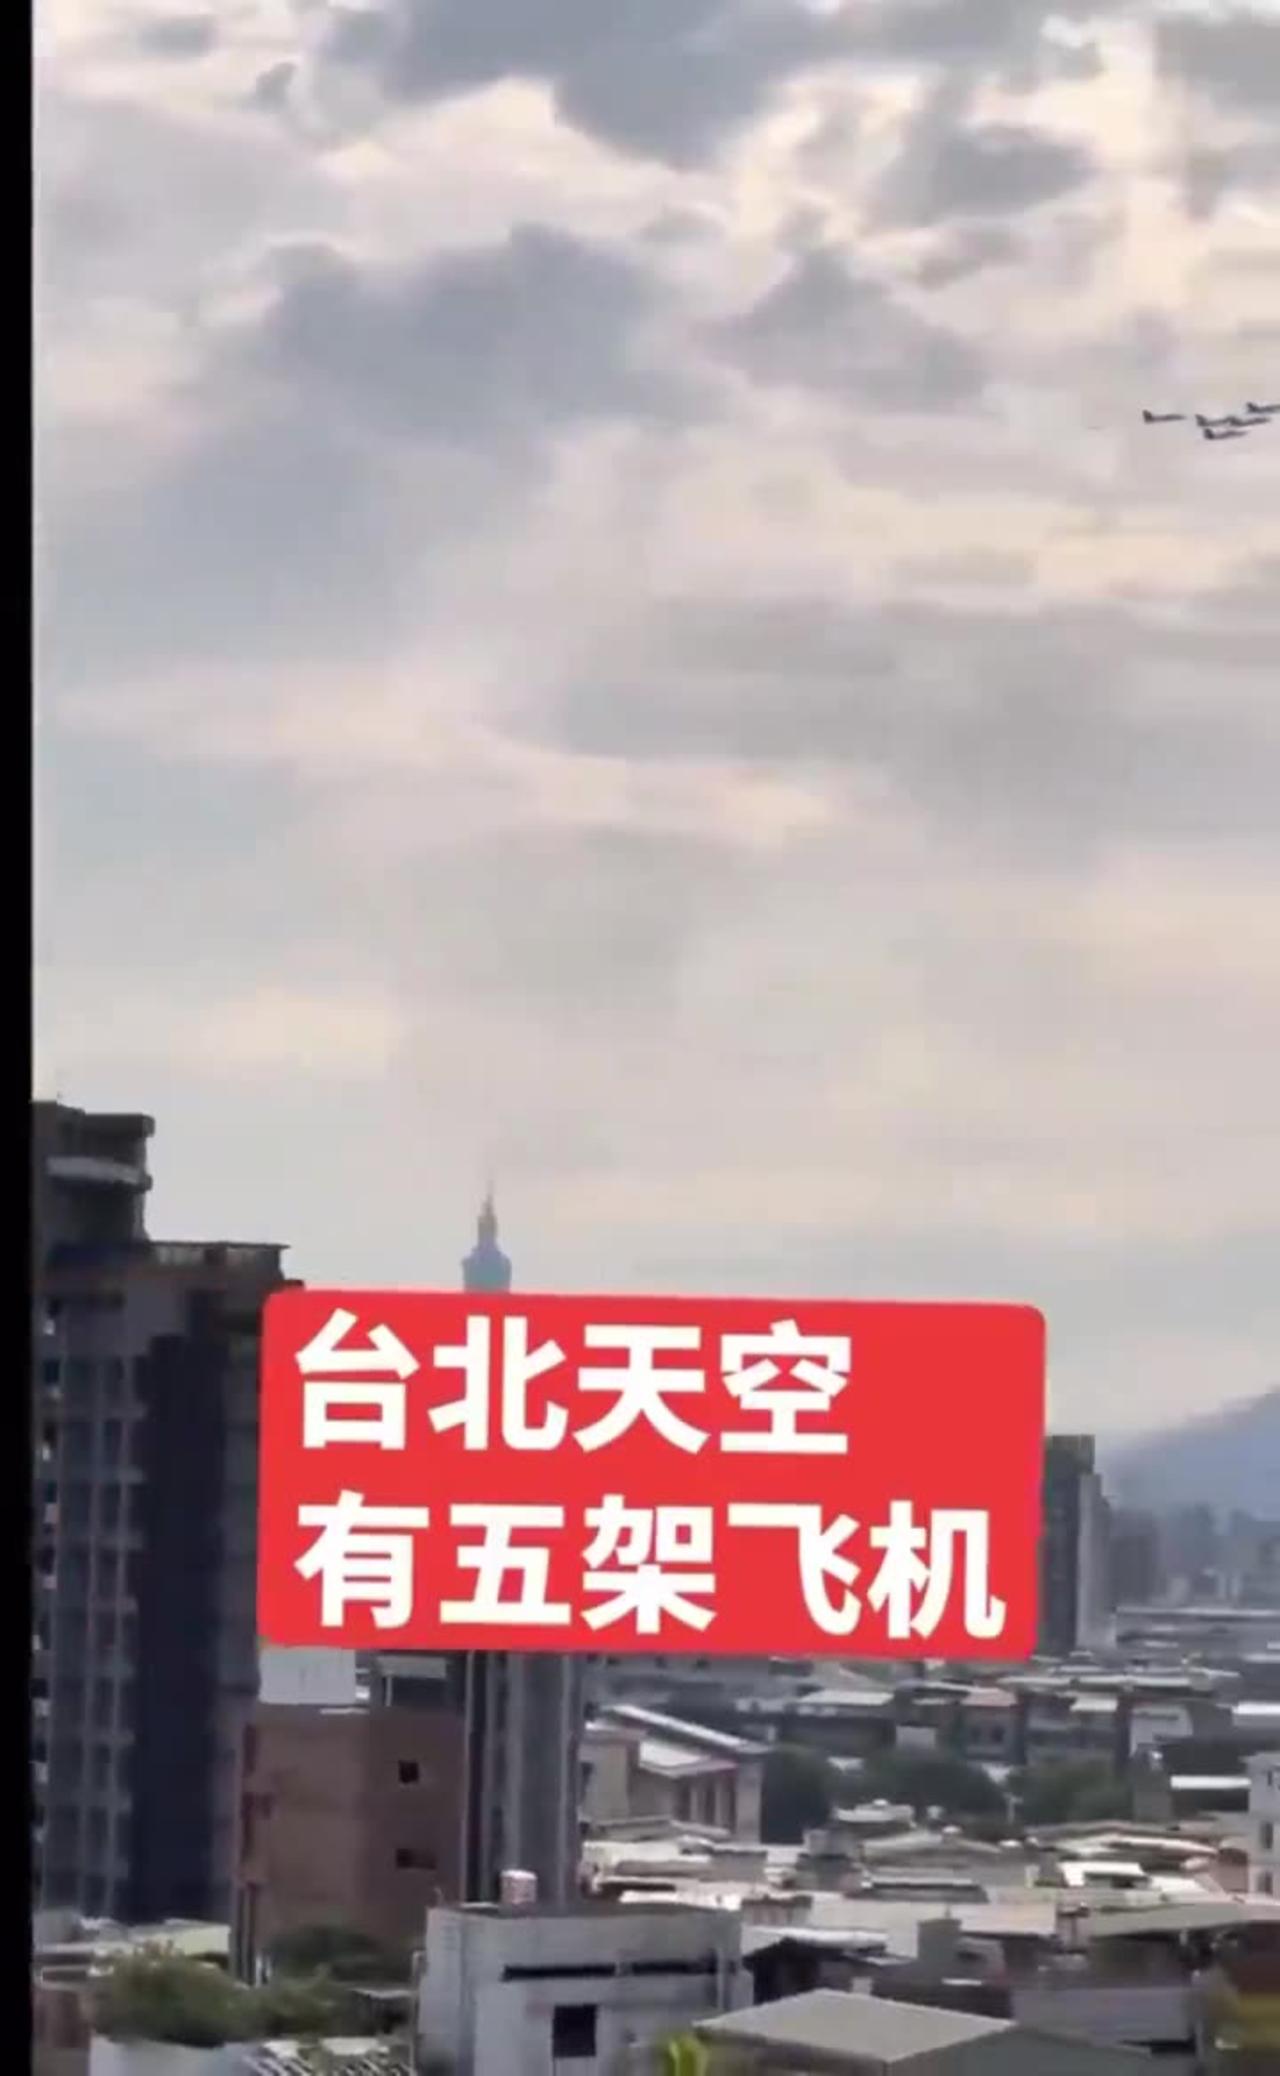 BREAKING: Video appears to show Taiwanese Air Force jets scramble above Taipei